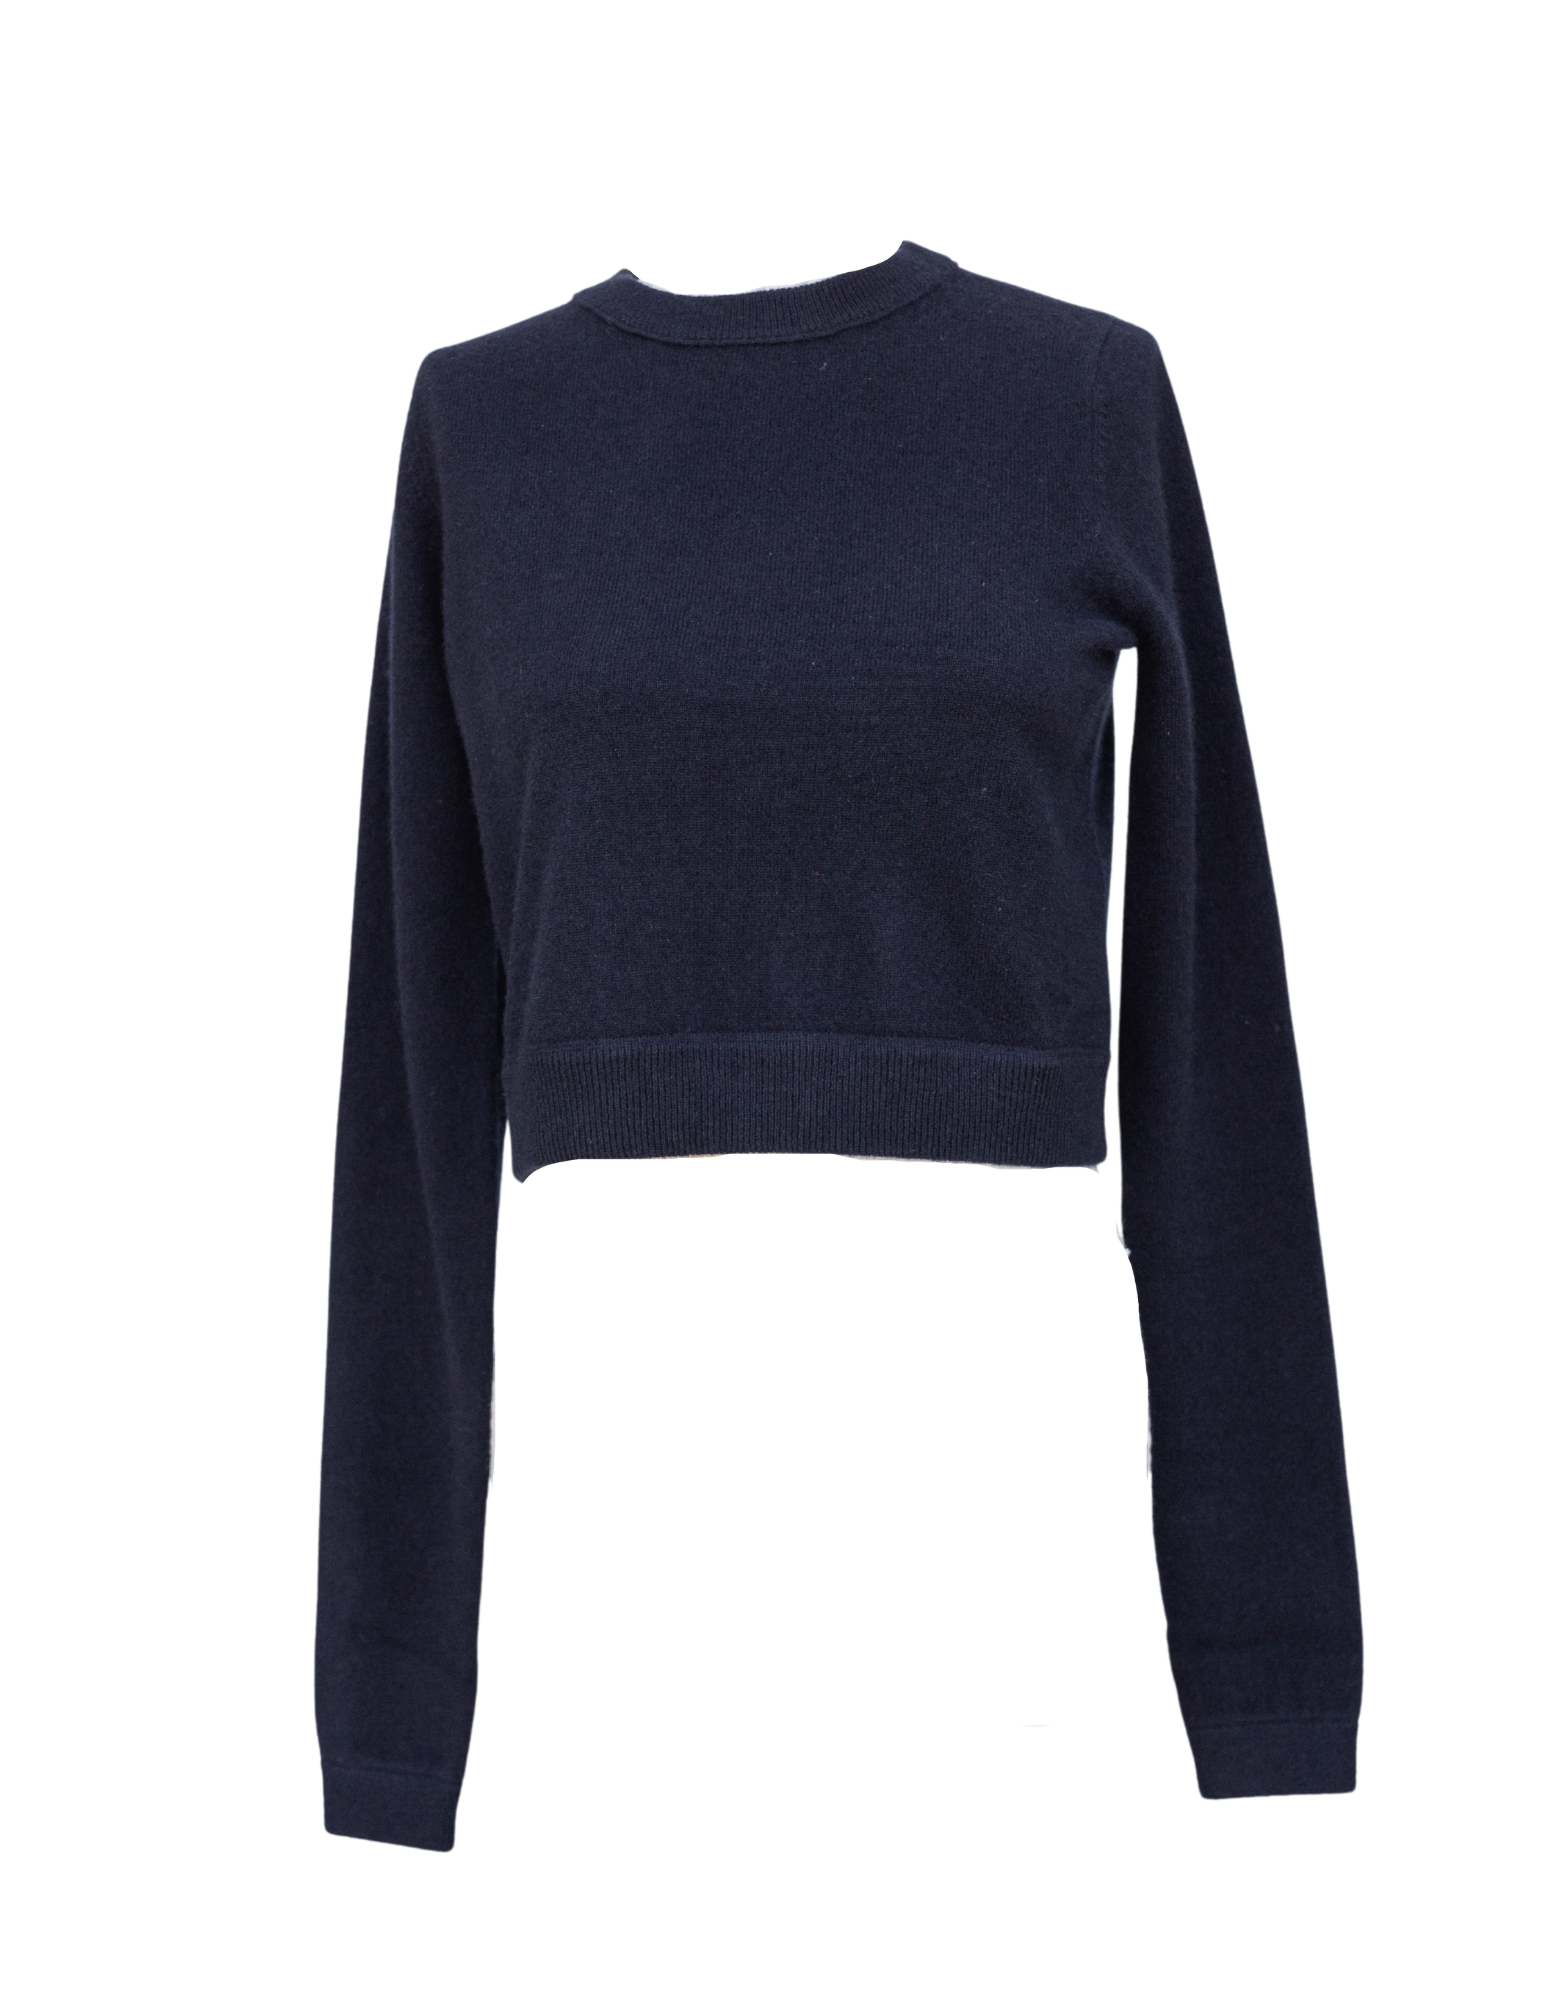 All Thumbs Sweater - Blue on Blue